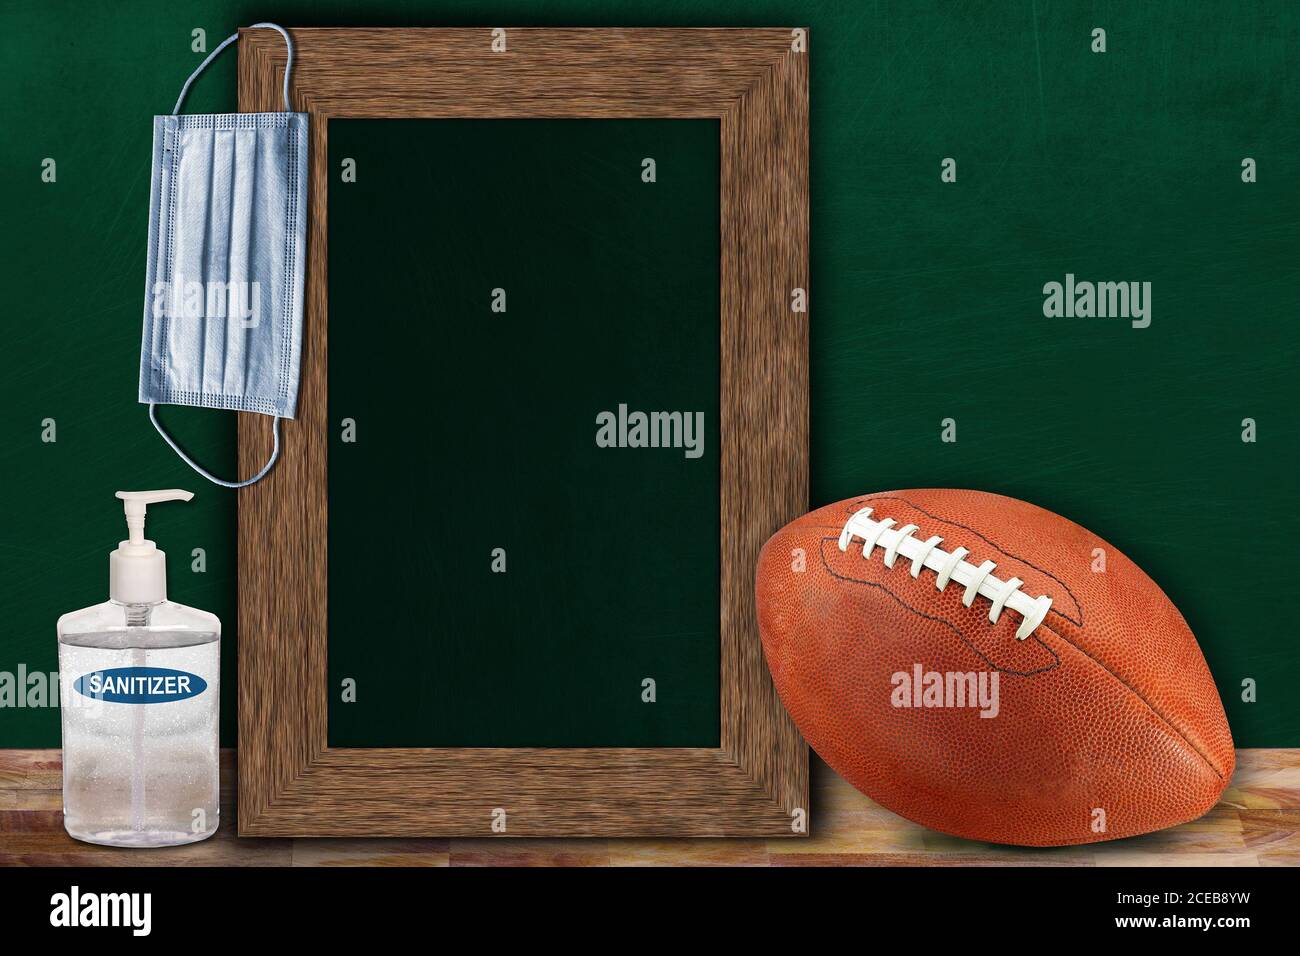 COVID-19 new normal sports concept in a classroom setting showing framed chalkboard with copy space and American football on wooden table. Stock Photo